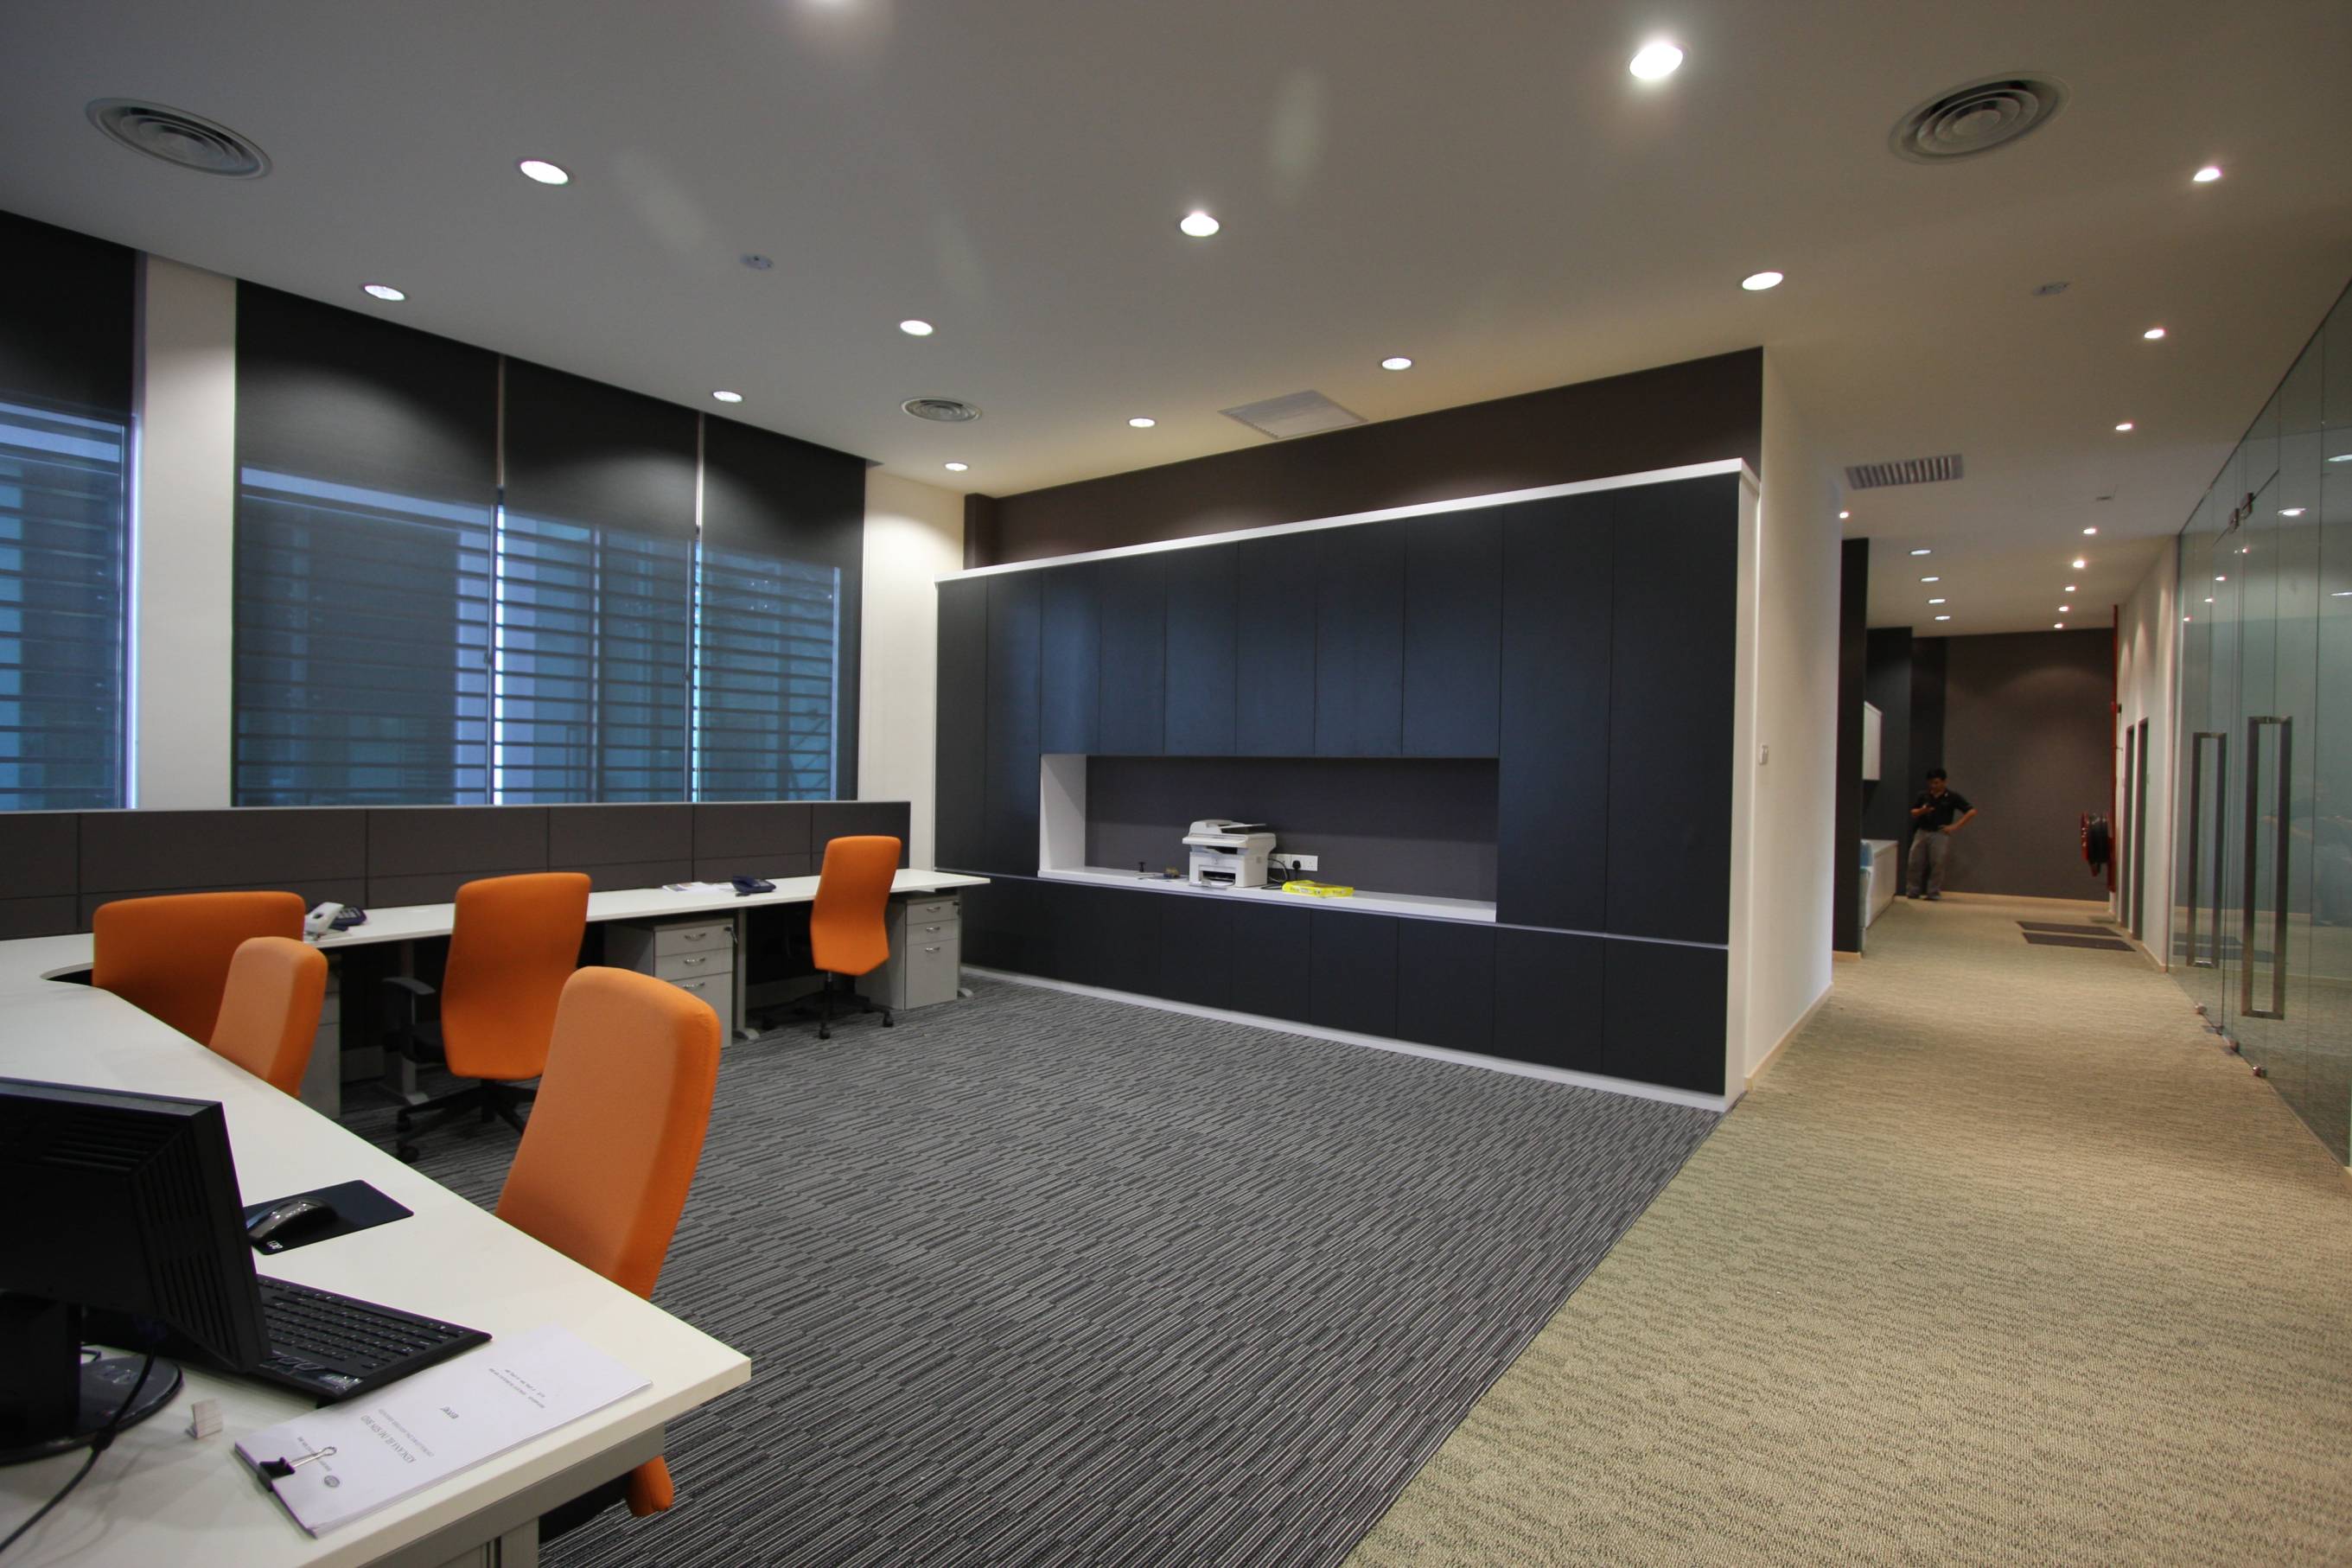 Modern and Functional Office-16026441523.jpg